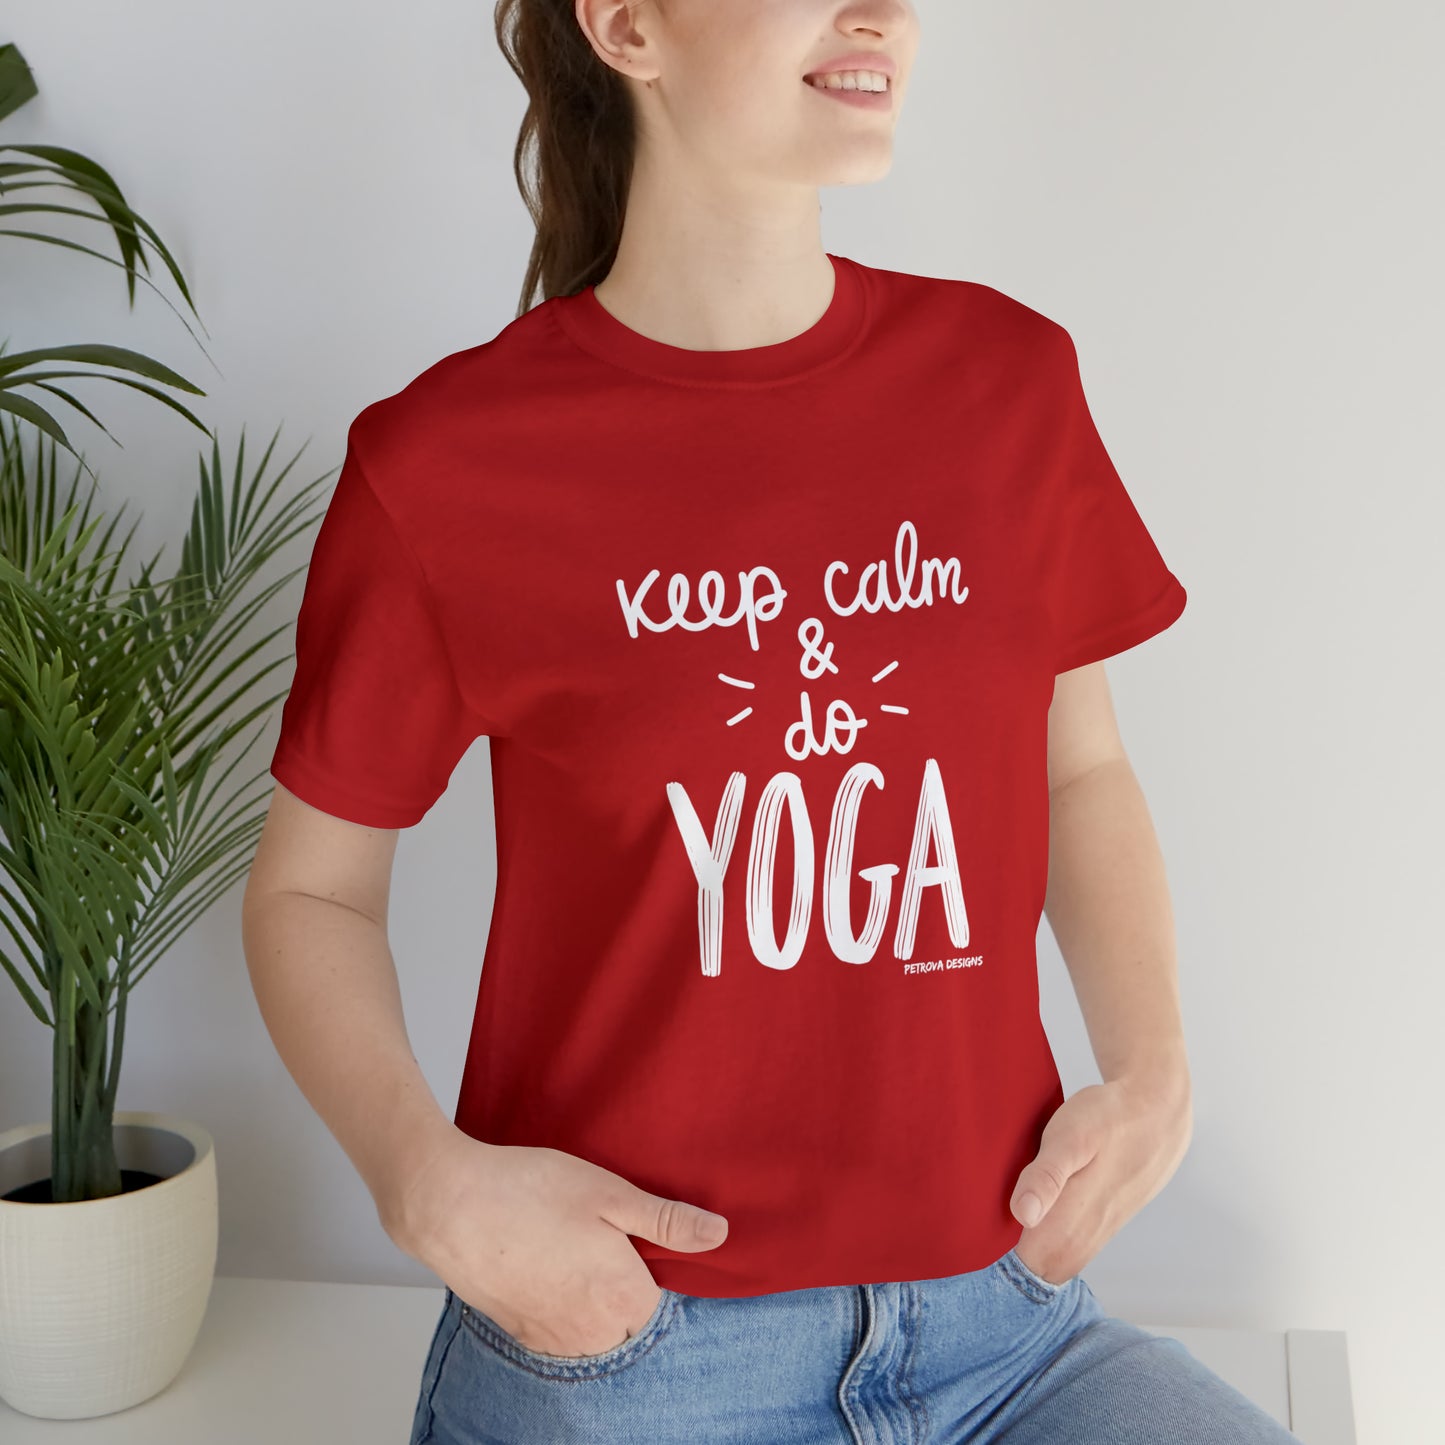 Red S T-Shirt Tshirt Design Gift for Friend and Family Short Sleeved Shirt Yoga Petrova Designs